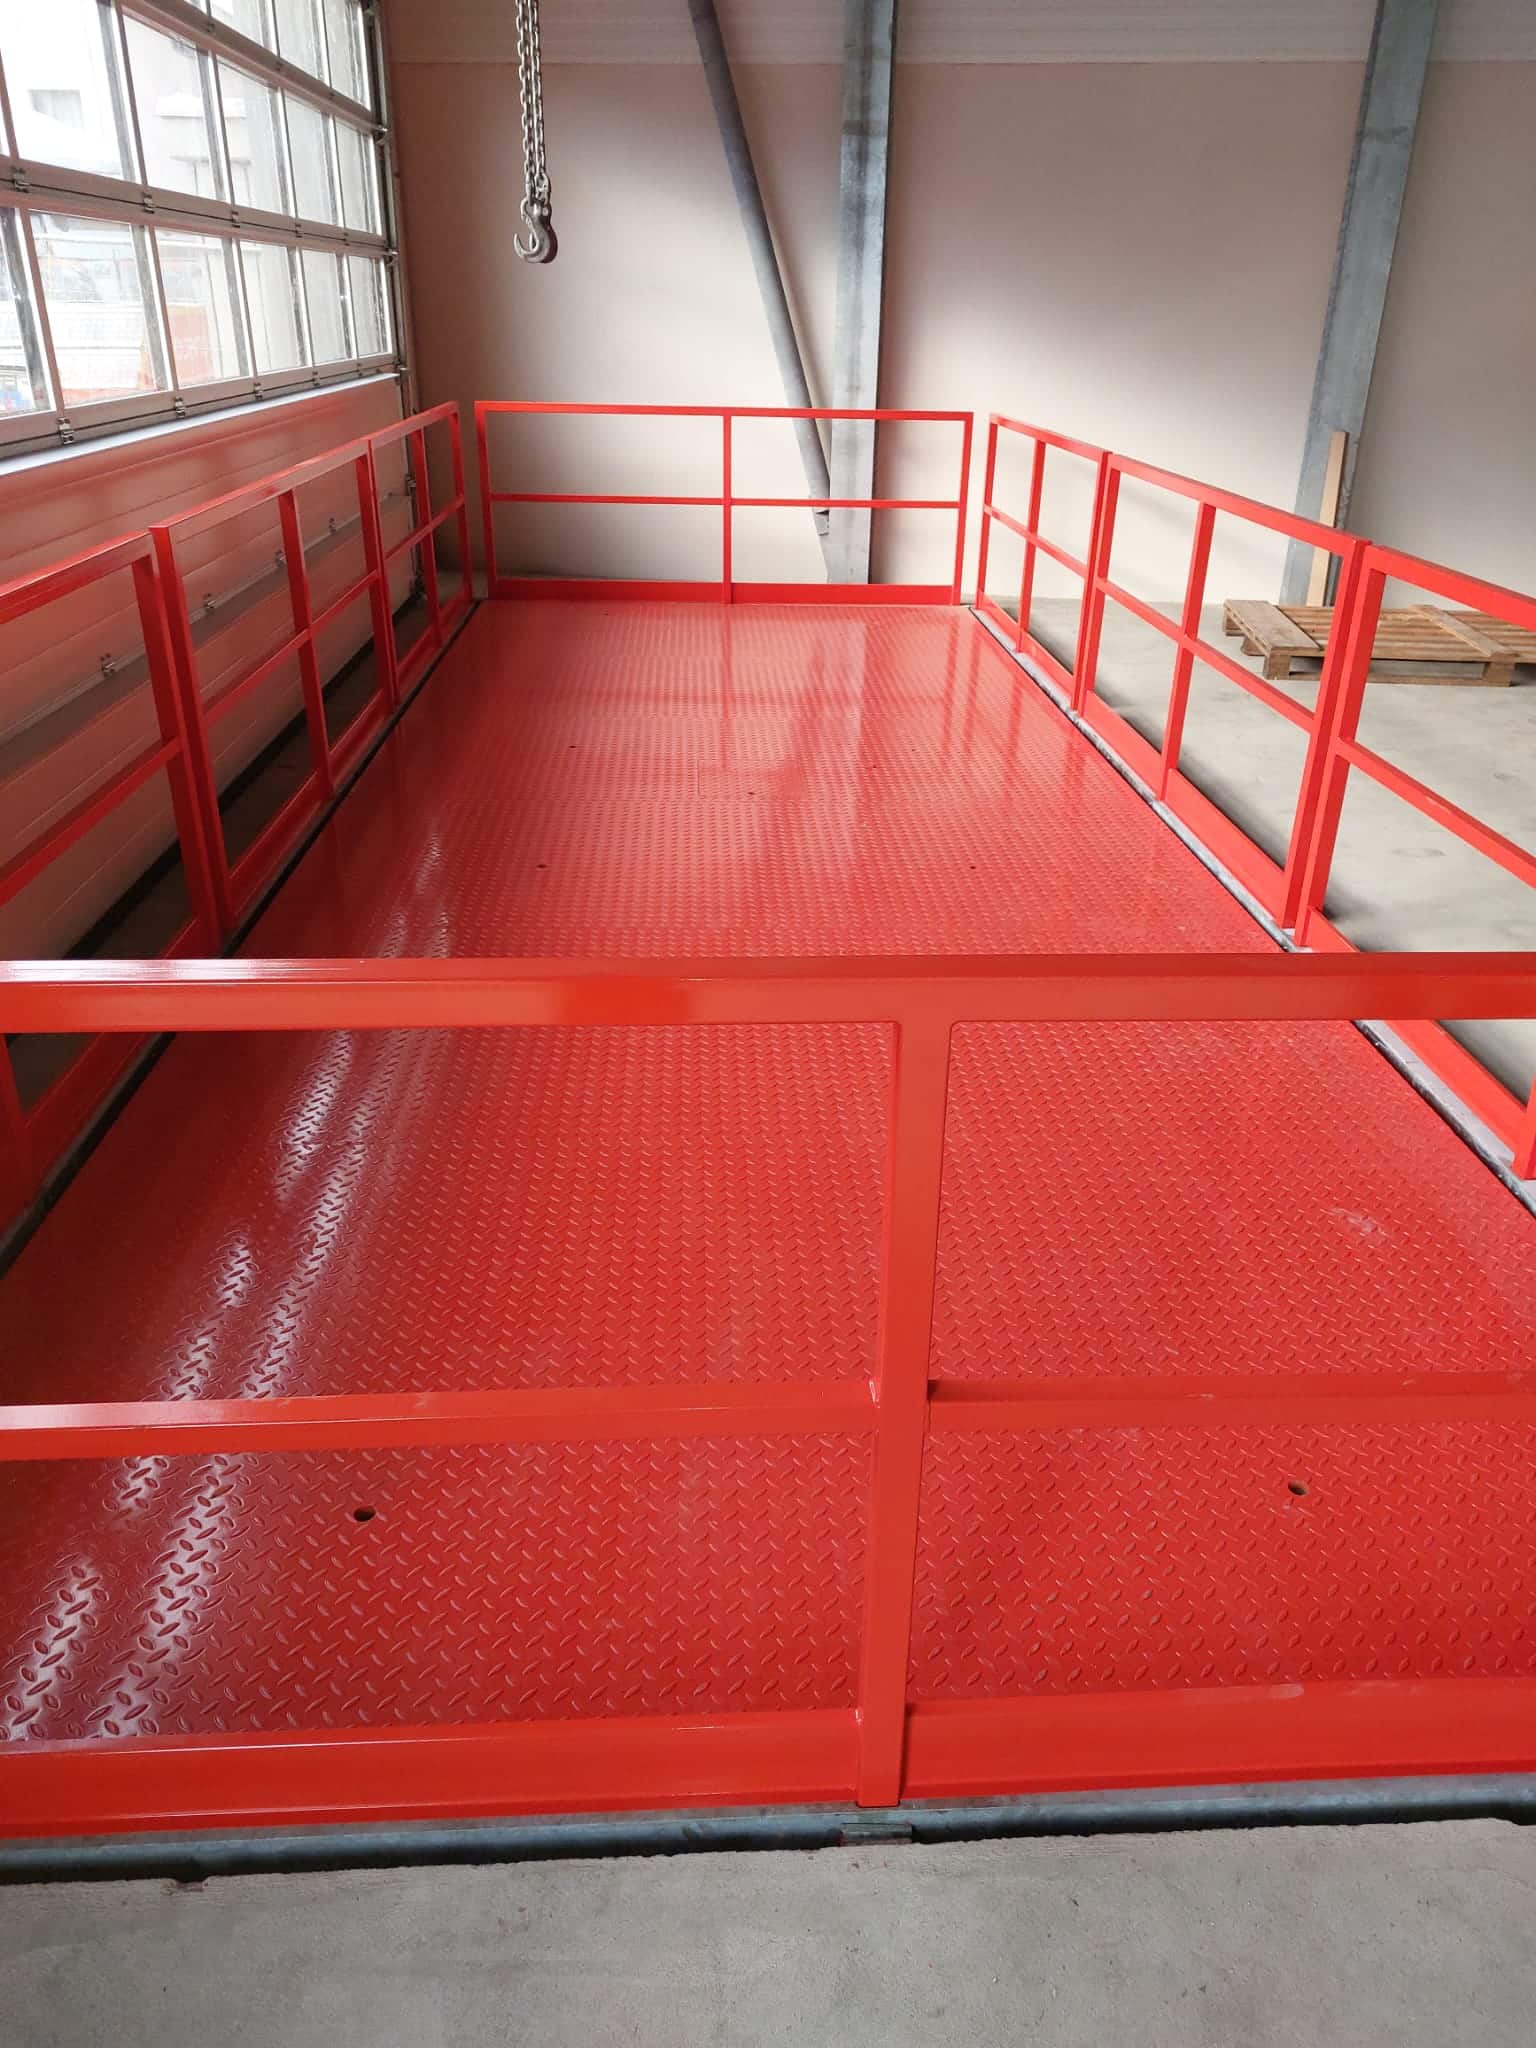 Scissor lift table at the upper stop with railings